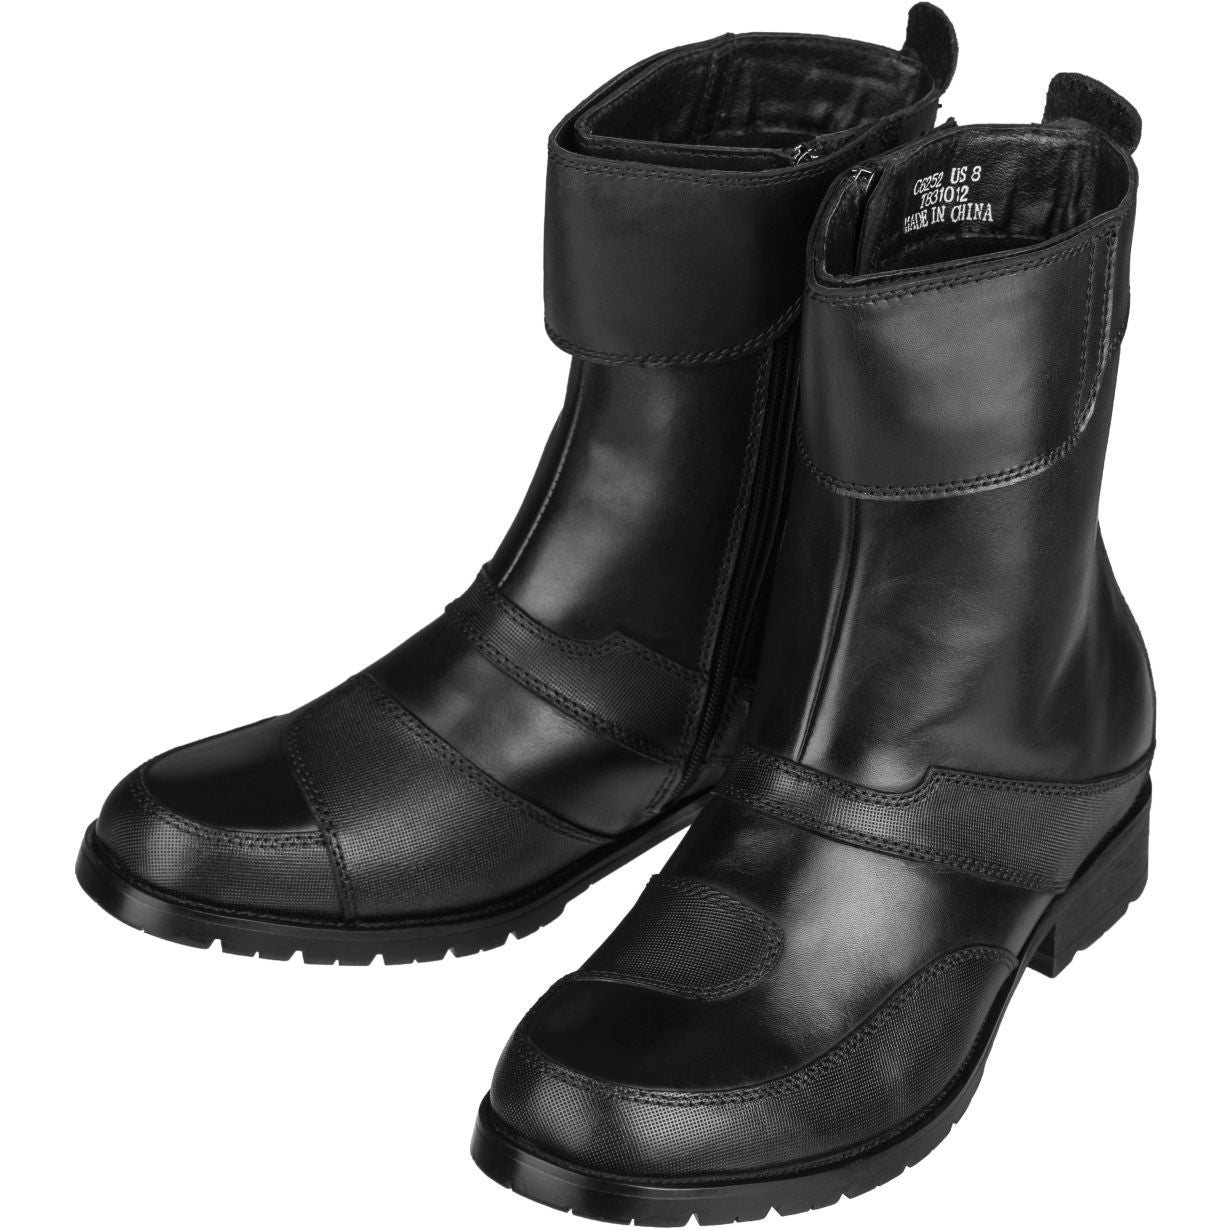 Elevator shoes height increase CALTO Zipper High-Top Biker Boots - 3.3 Inches - G6252